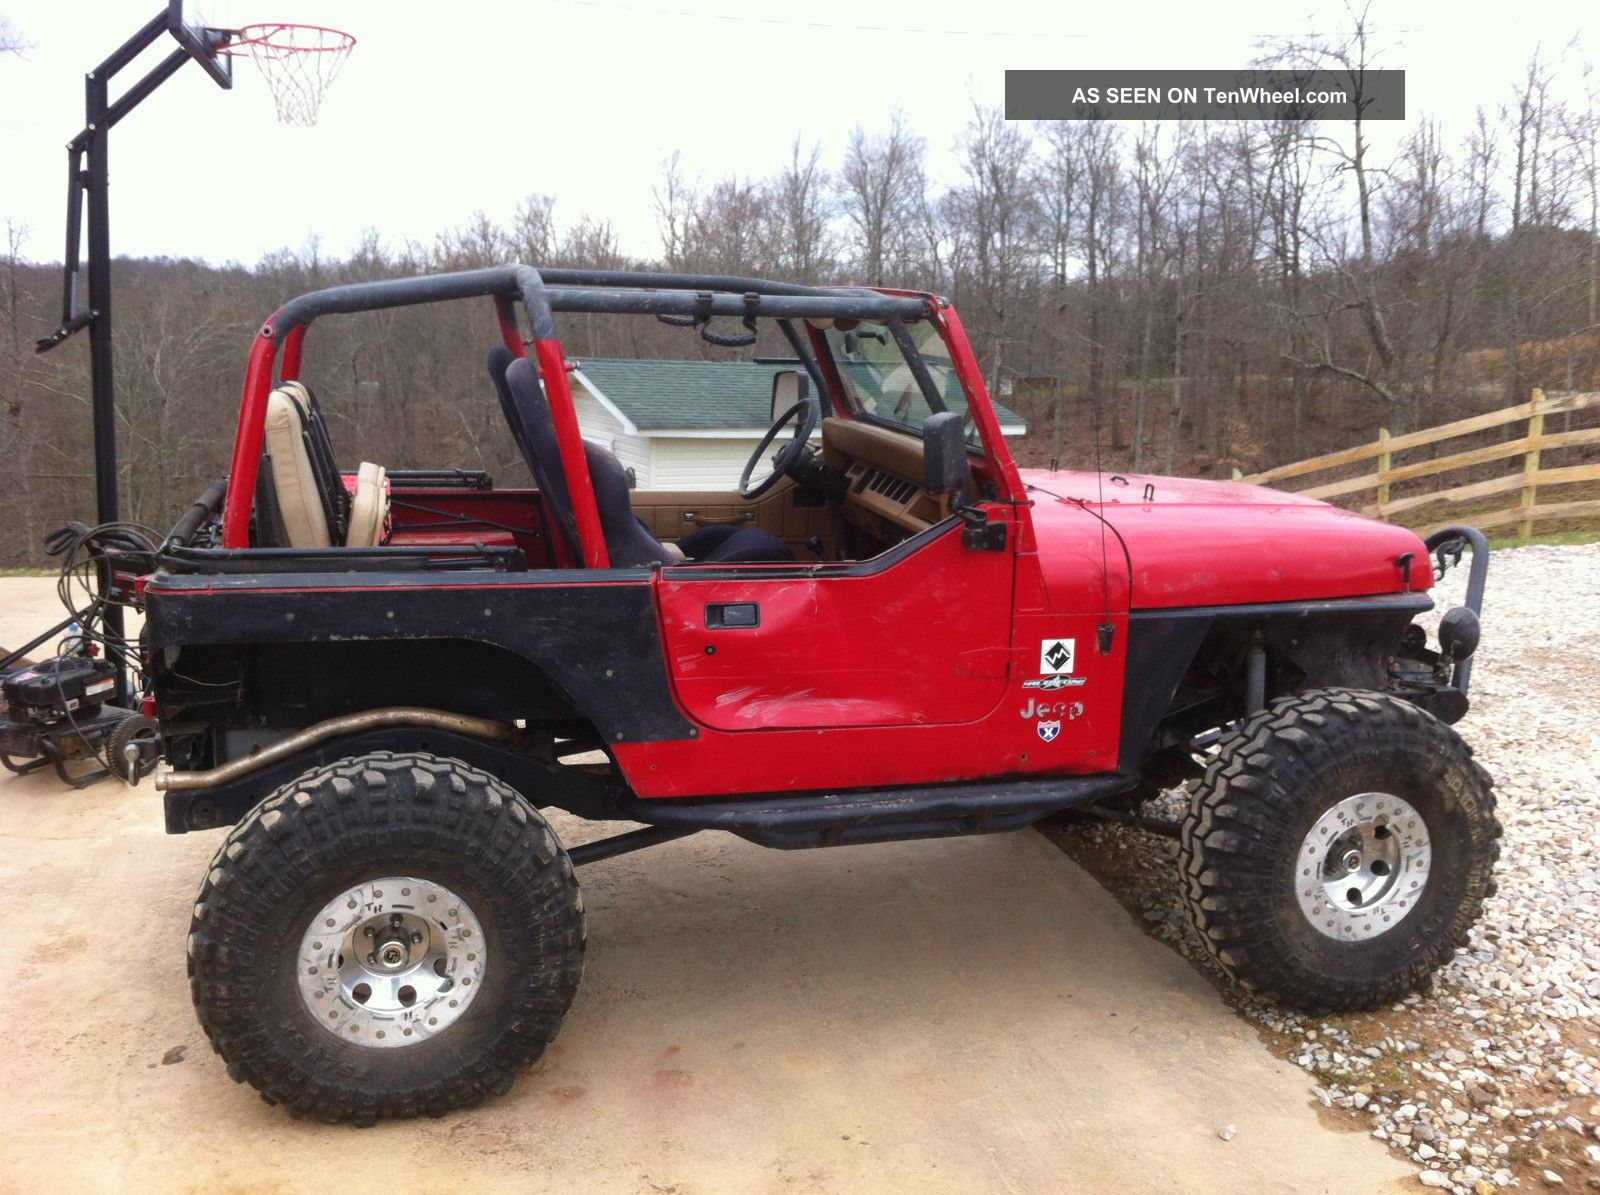 1994 Jeep wrangler yj owners manual #2